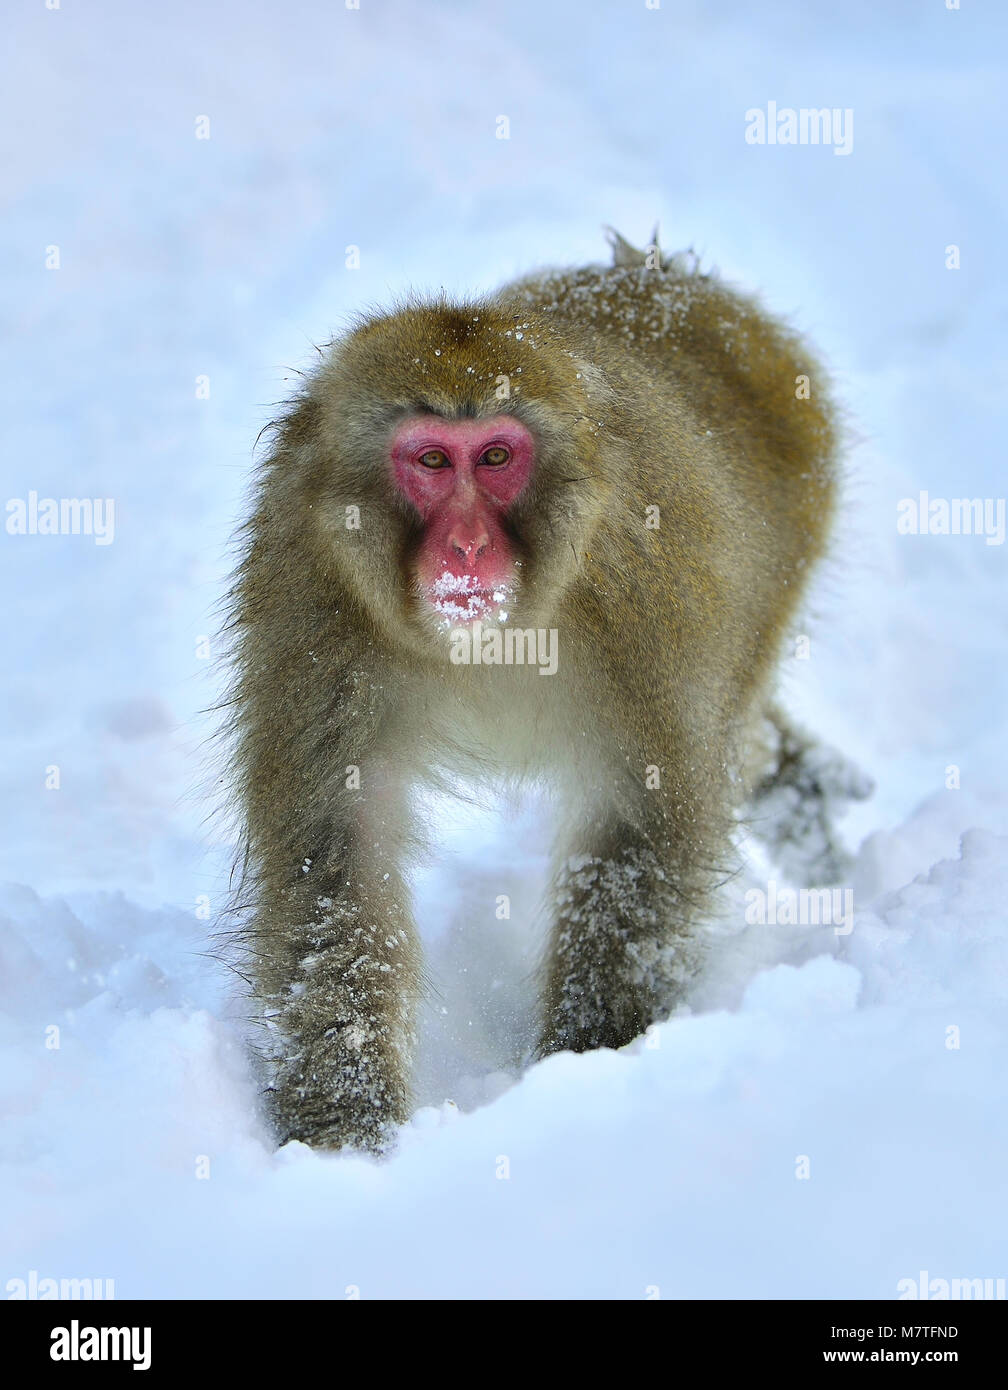 Snow monkey. The Japanese macaque ( Scientific name: Macaca fuscata), also known as the snow monkey. Stock Photo